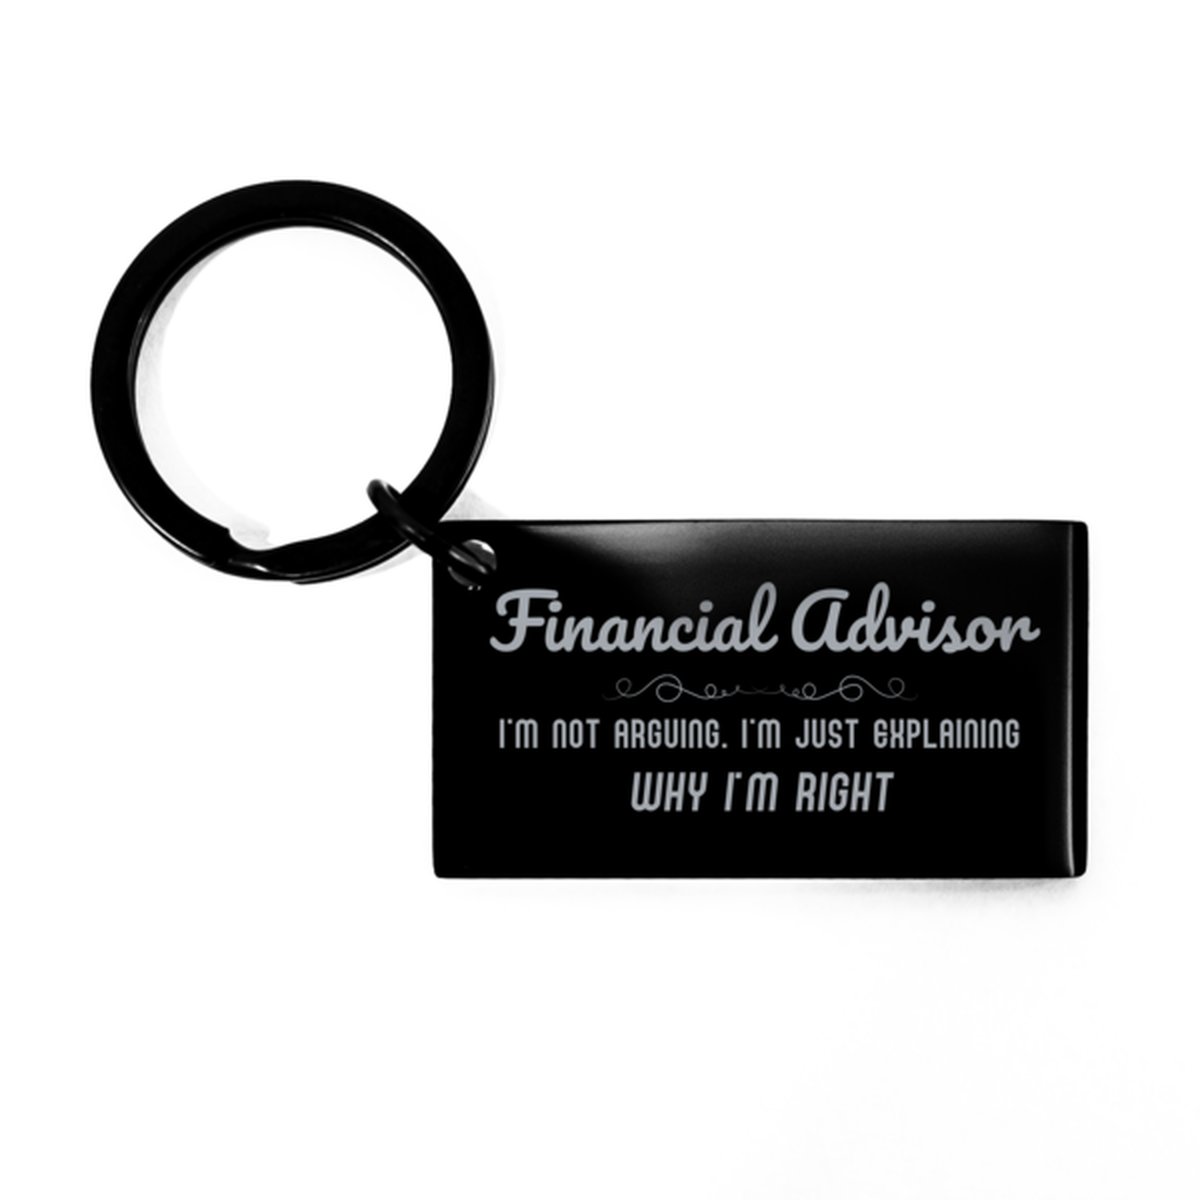 Financial Advisor I'm not Arguing. I'm Just Explaining Why I'm RIGHT Keychain, Funny Saying Quote Financial Advisor Gifts For Financial Advisor Graduation Birthday Christmas Gifts for Men Women Coworker